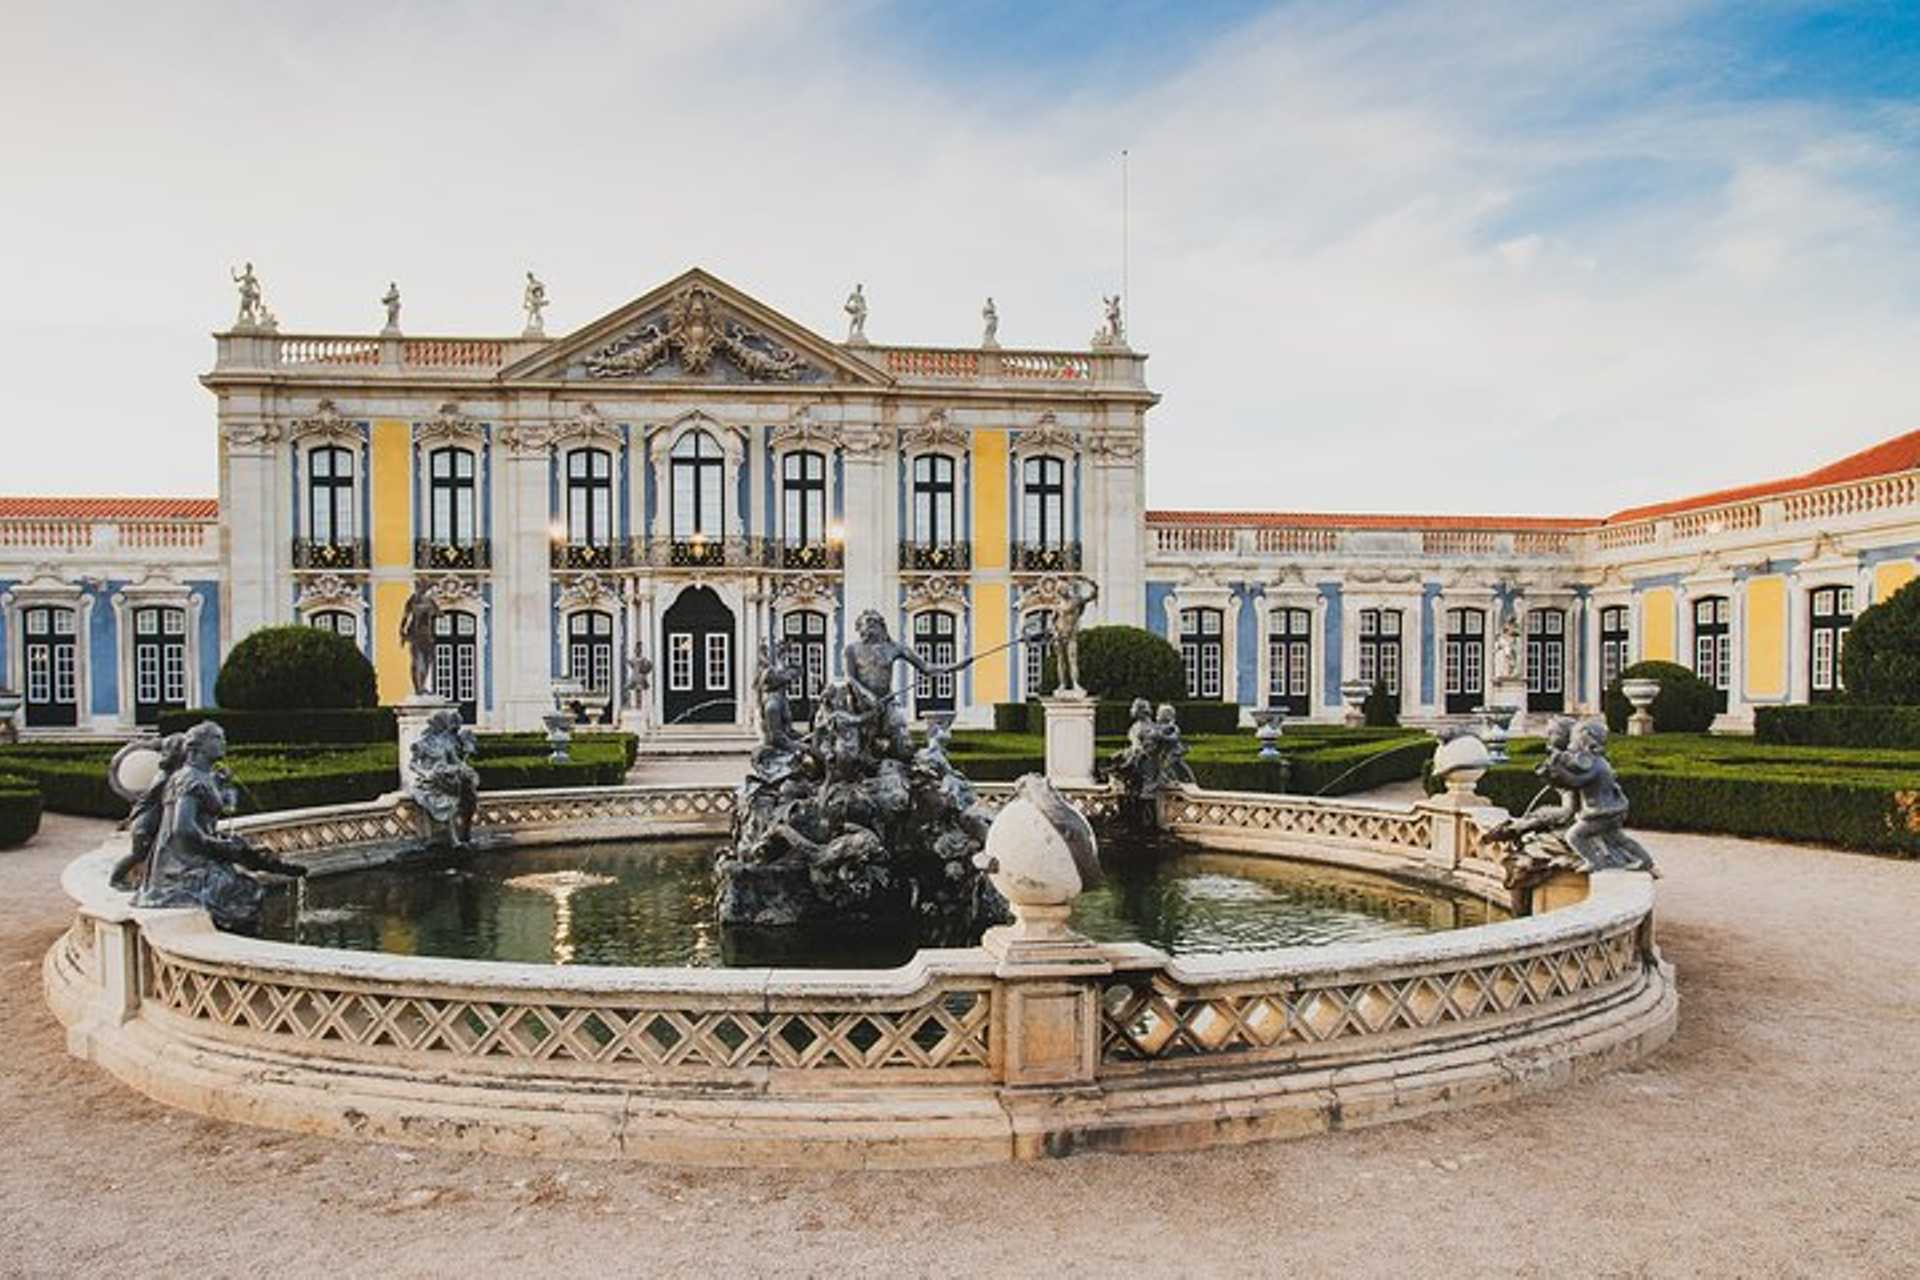 Lisbon Private Tour of Palaces in Queluz, Mafra and Lisbon in 1 Day